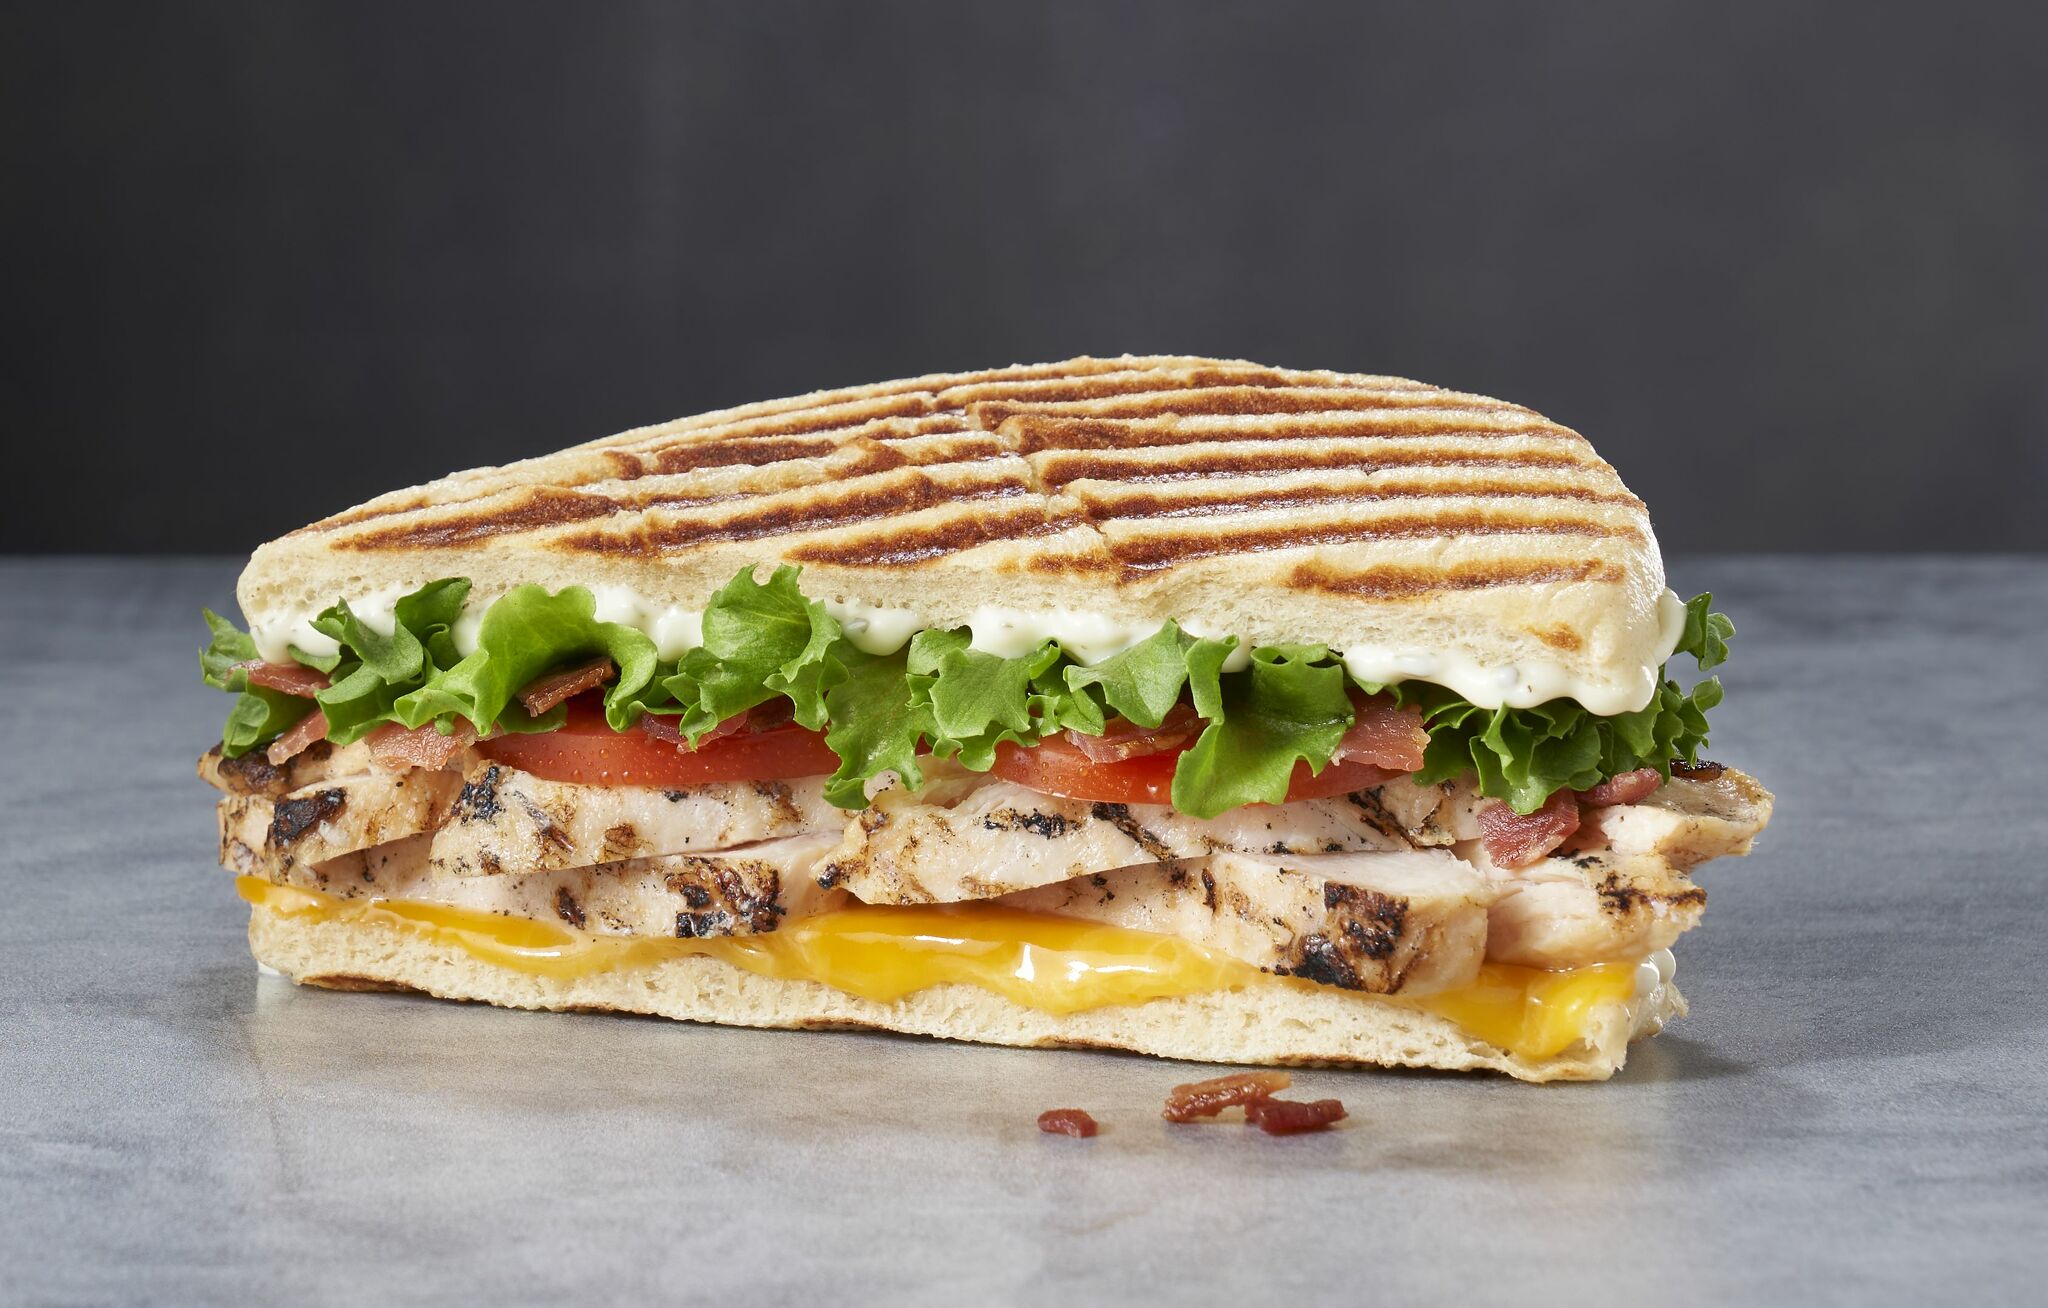  Hot Table panini sandwich shop opening in Manchester April 22 